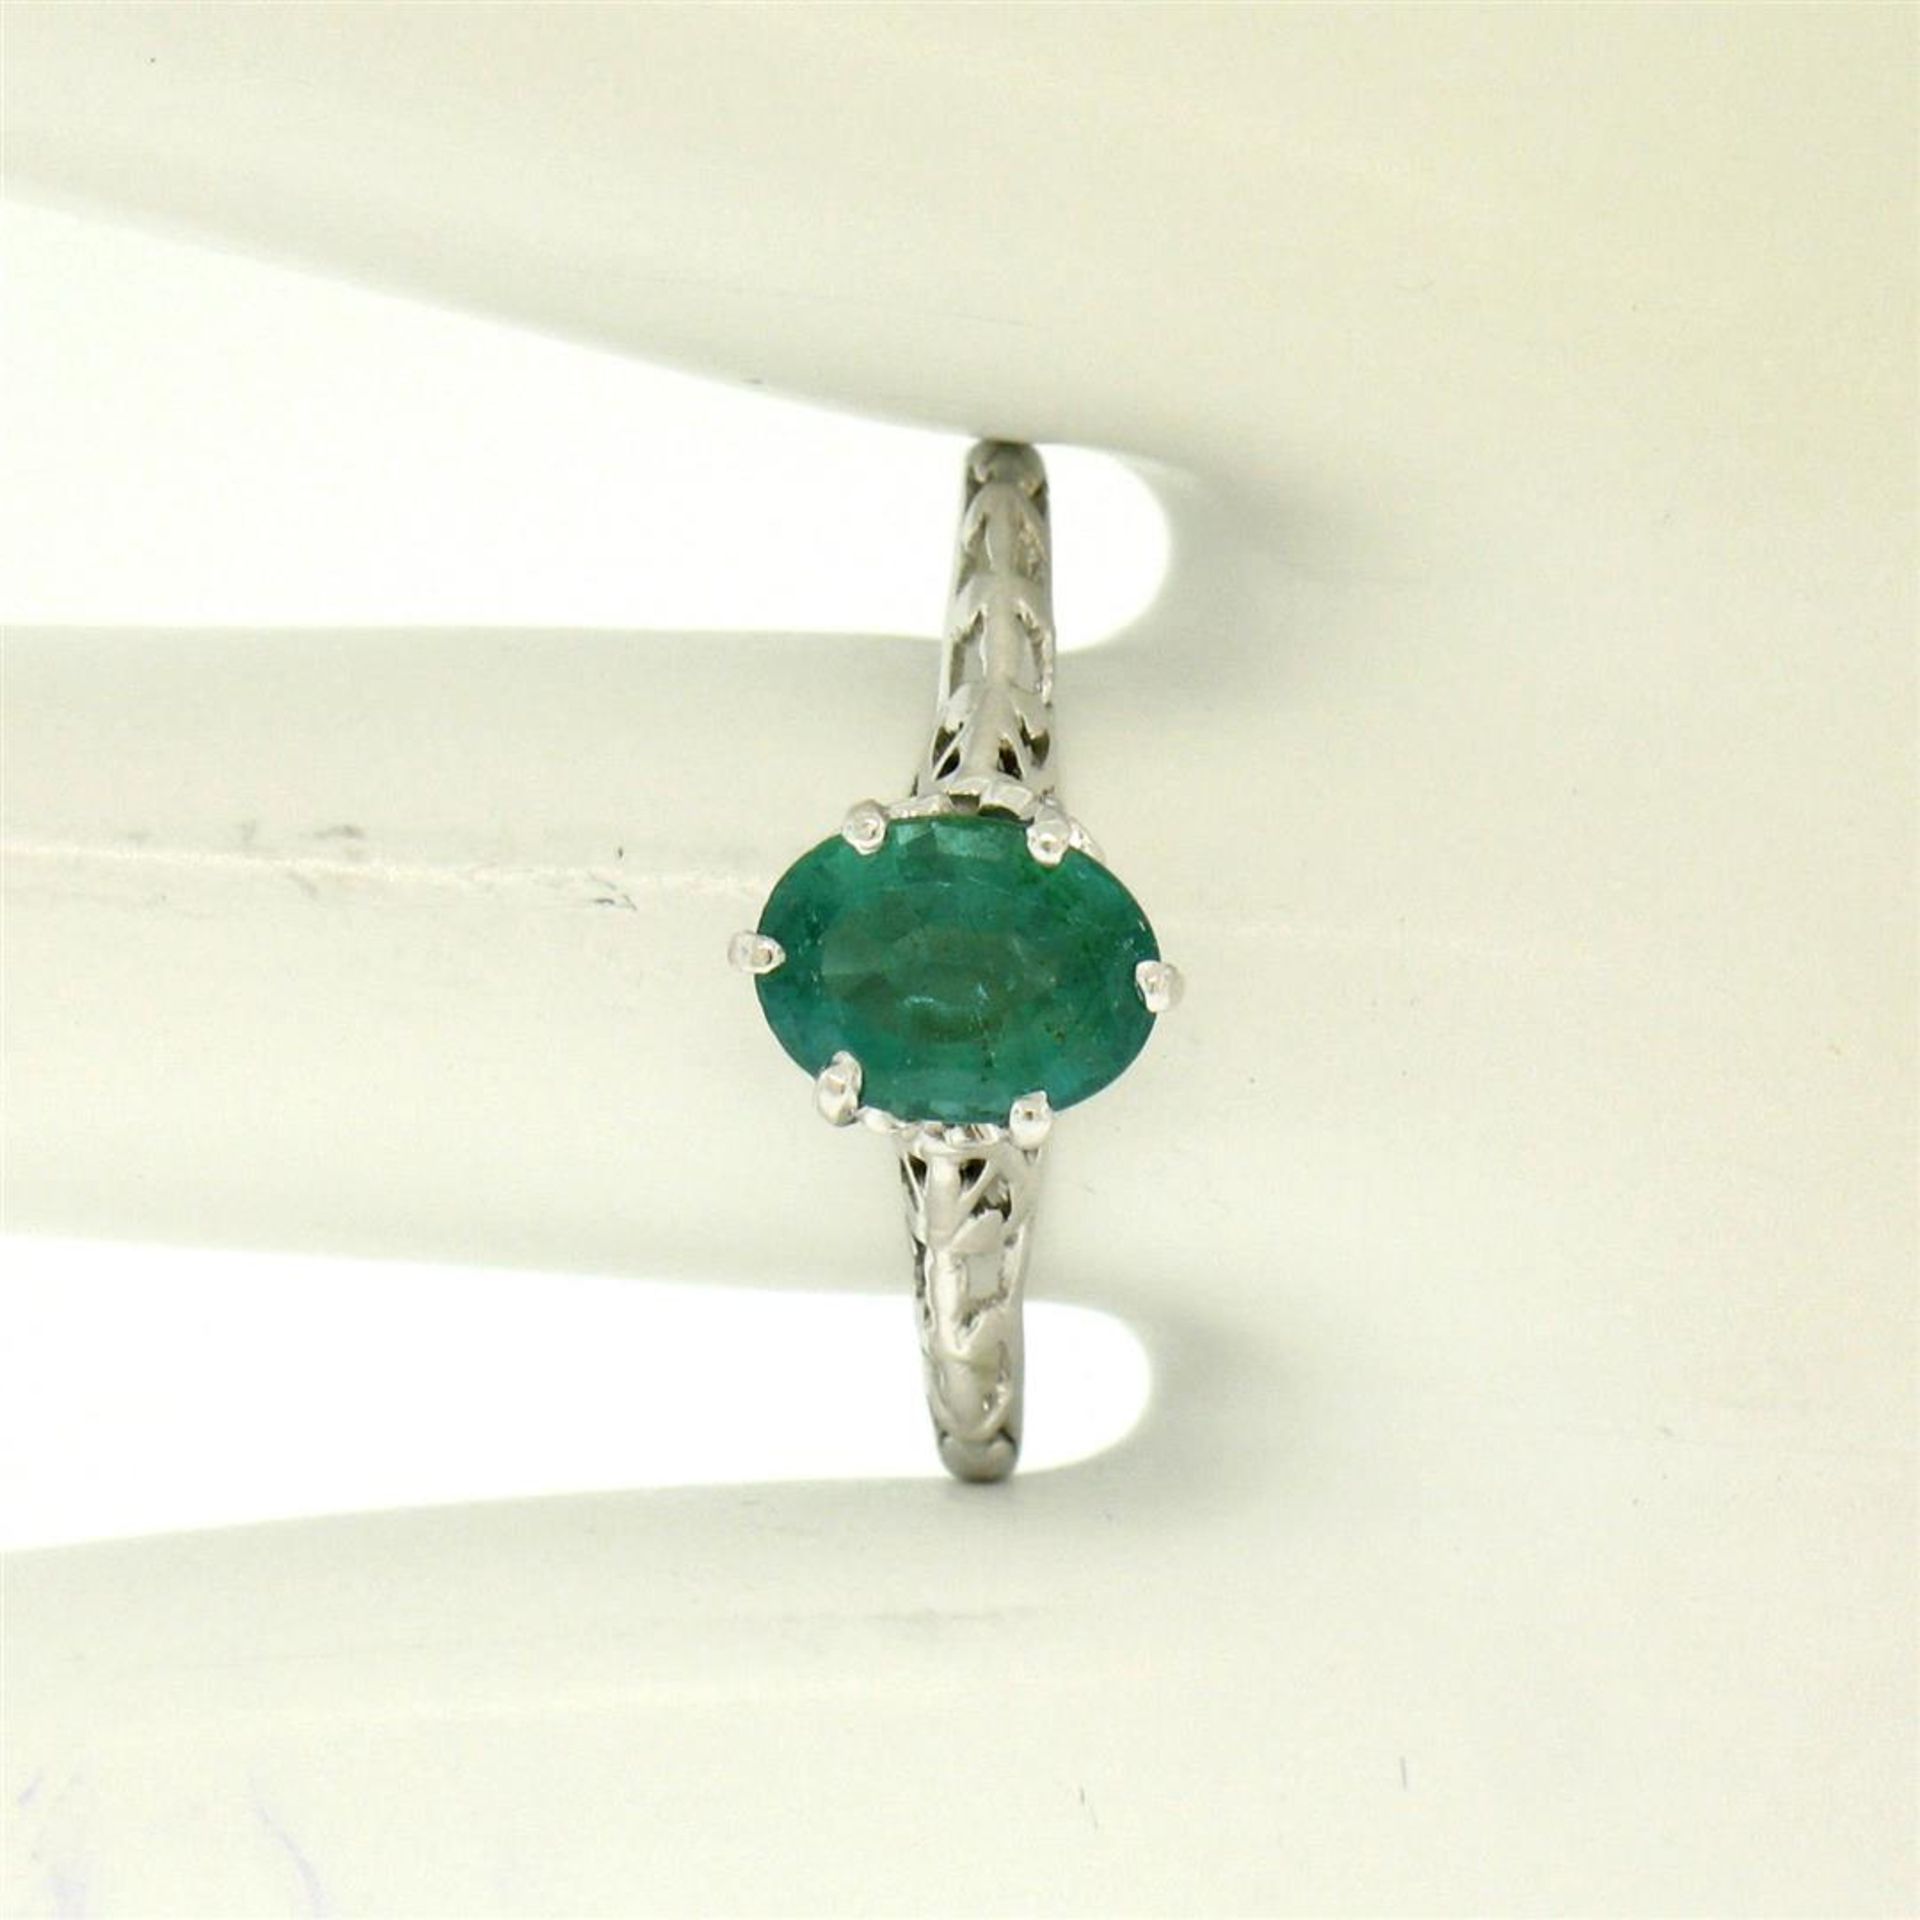 14k White Gold 1.38 ct Prong Set Oval Cut Emerald Filigree Solitaire Ring - Image 4 of 8